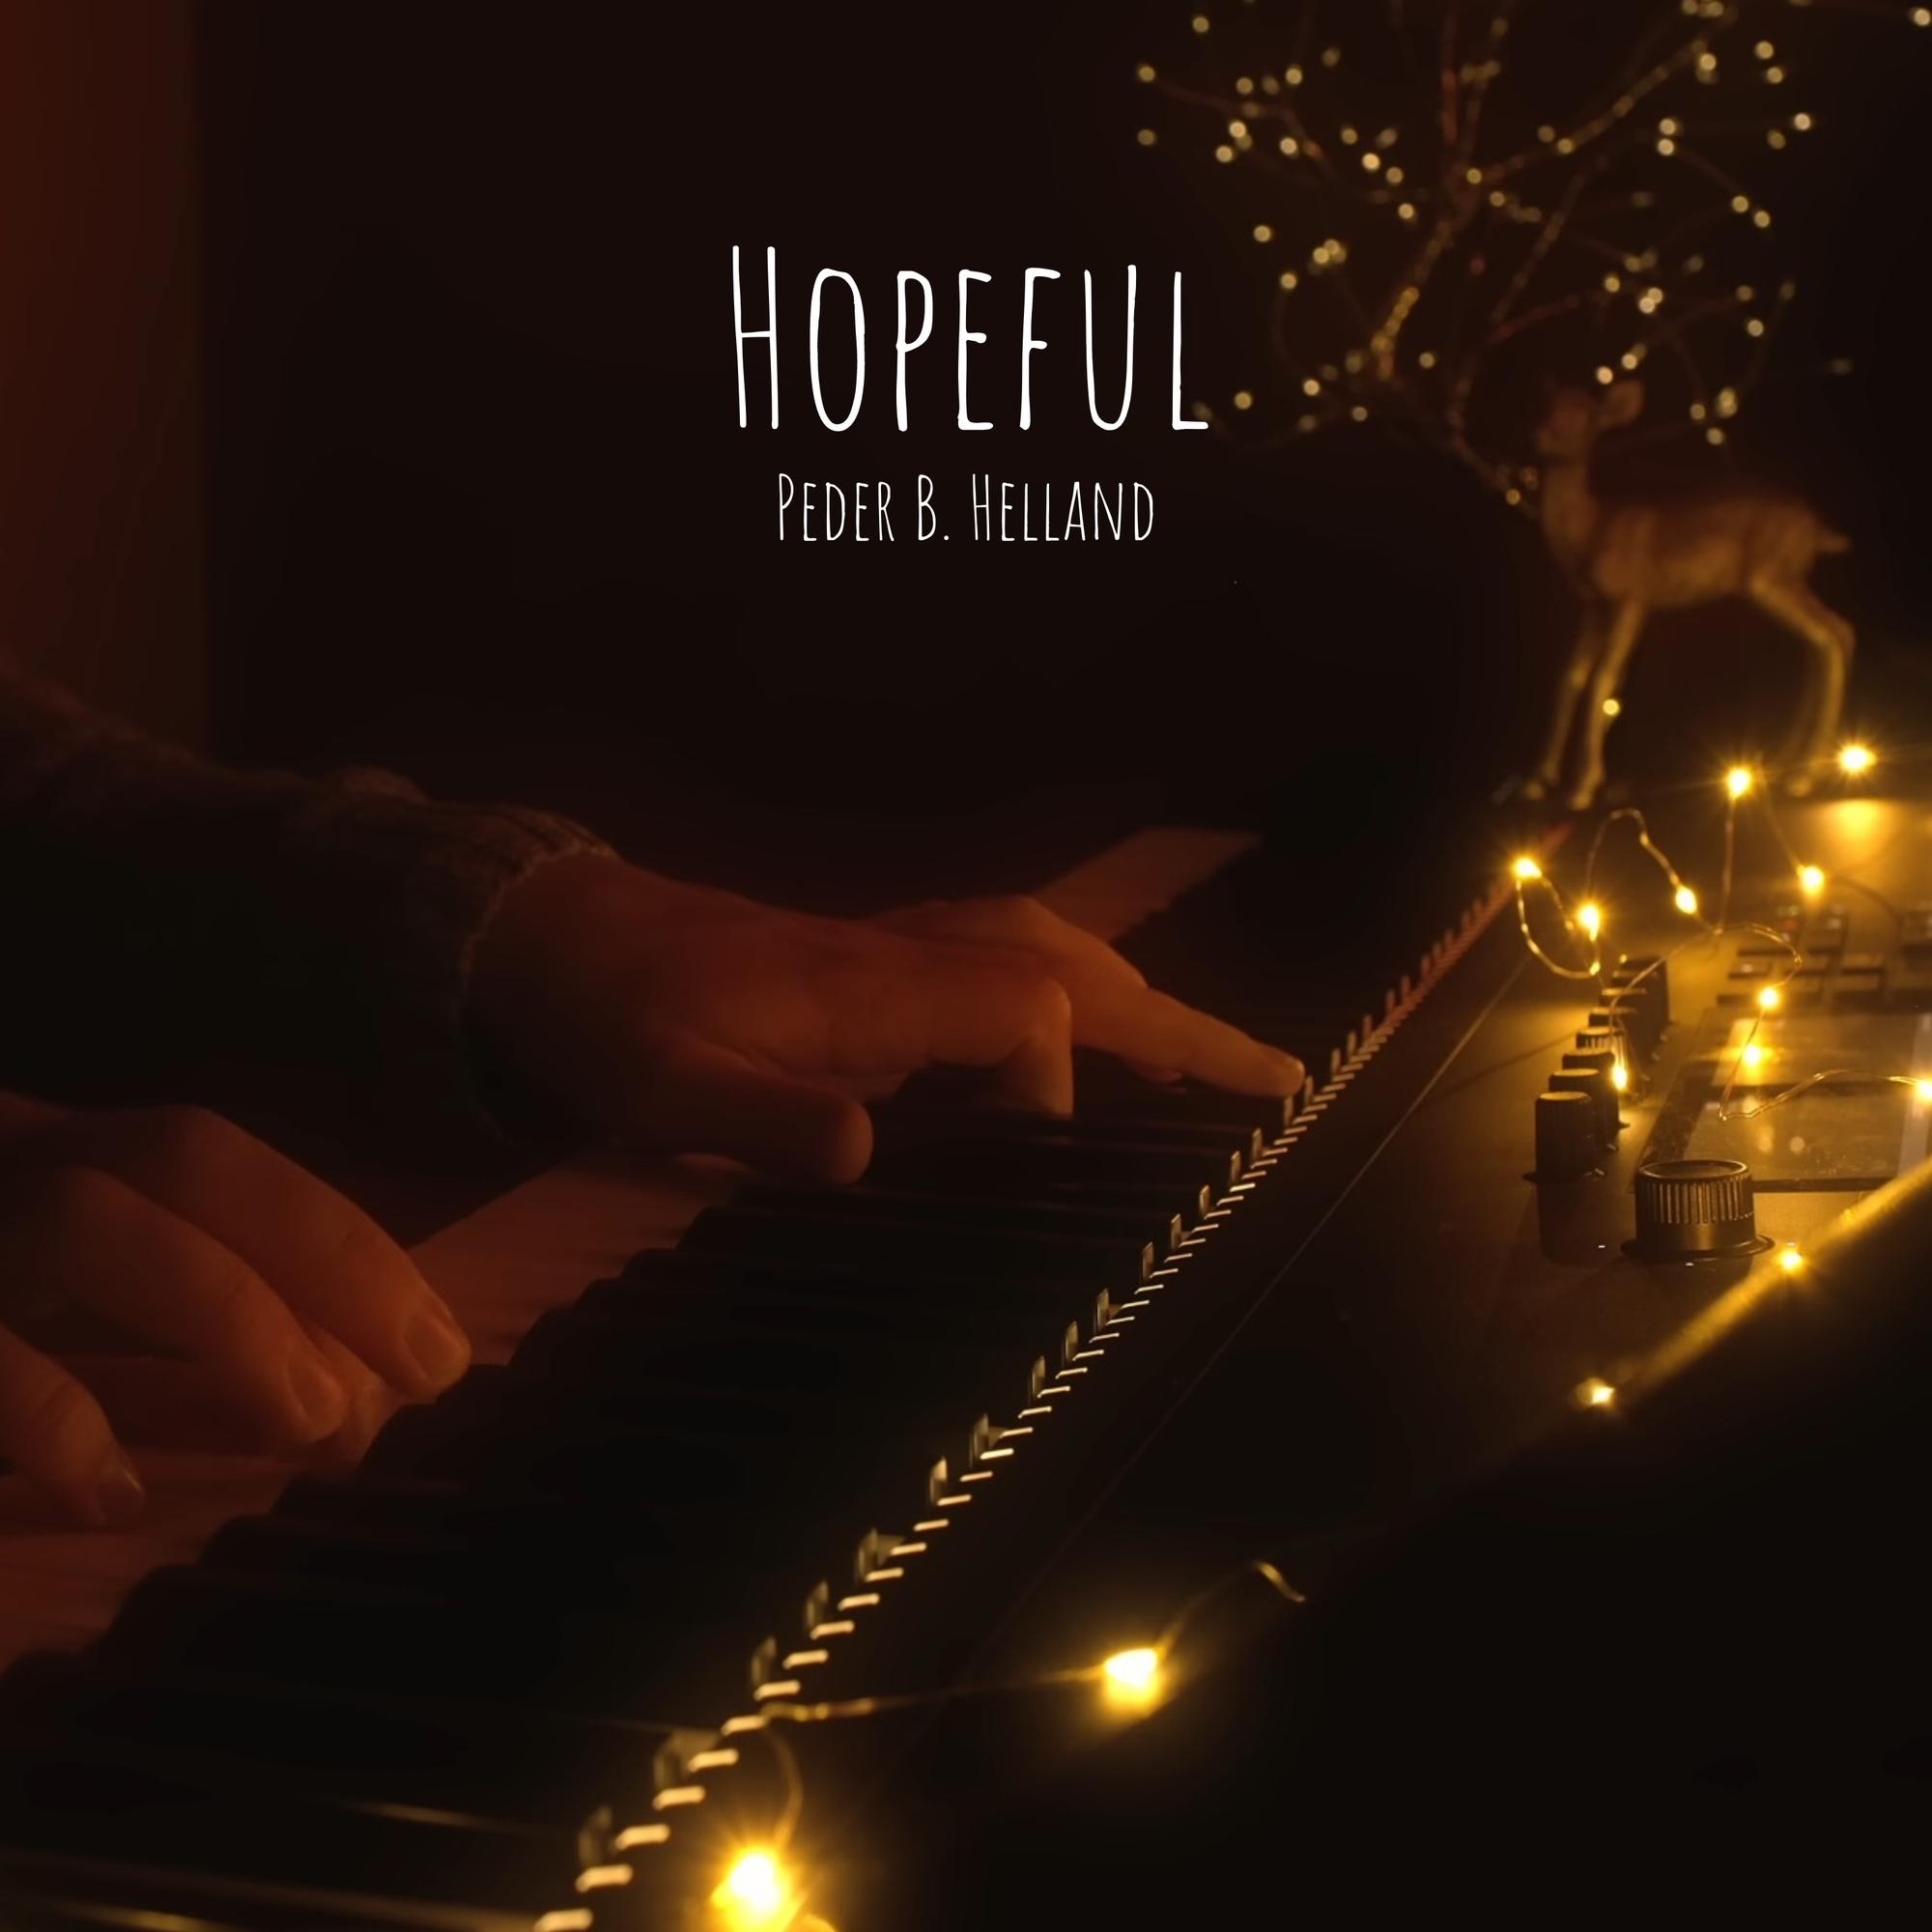 Cover art for the single Hopeful by Peder B. Helland